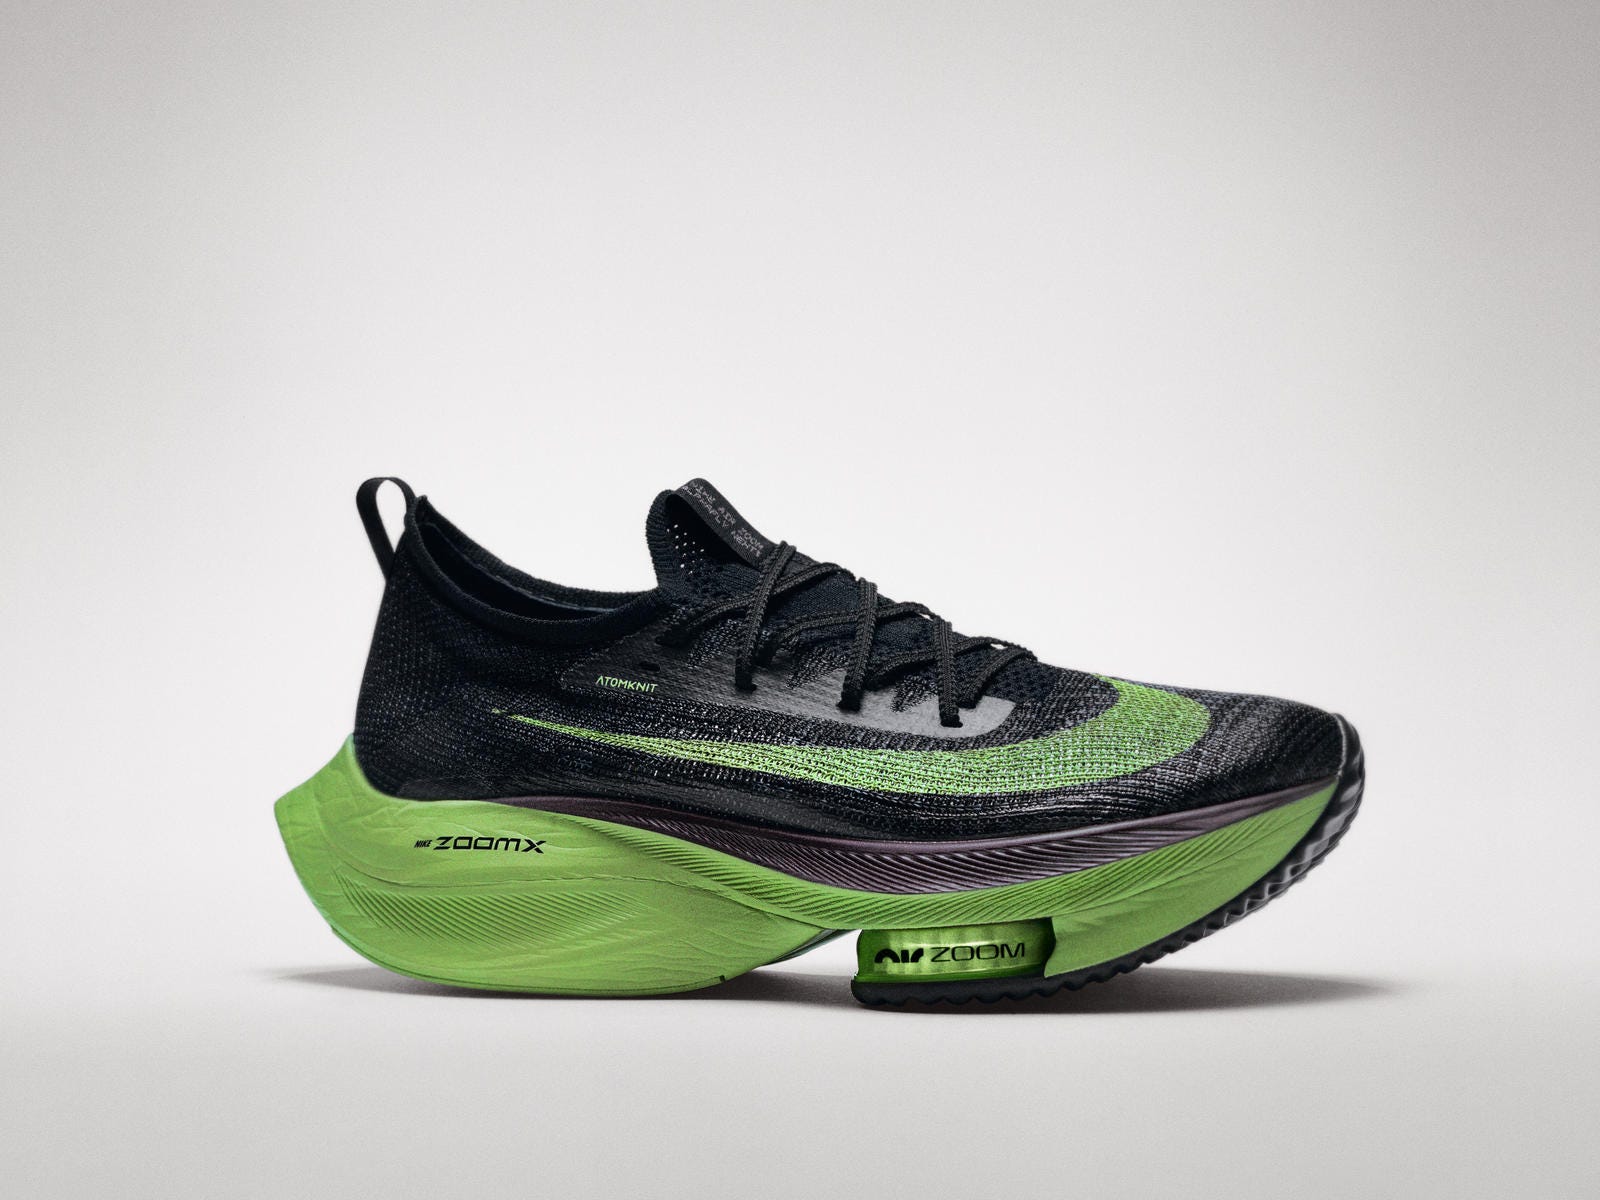 nike vaporfly shoes controversy